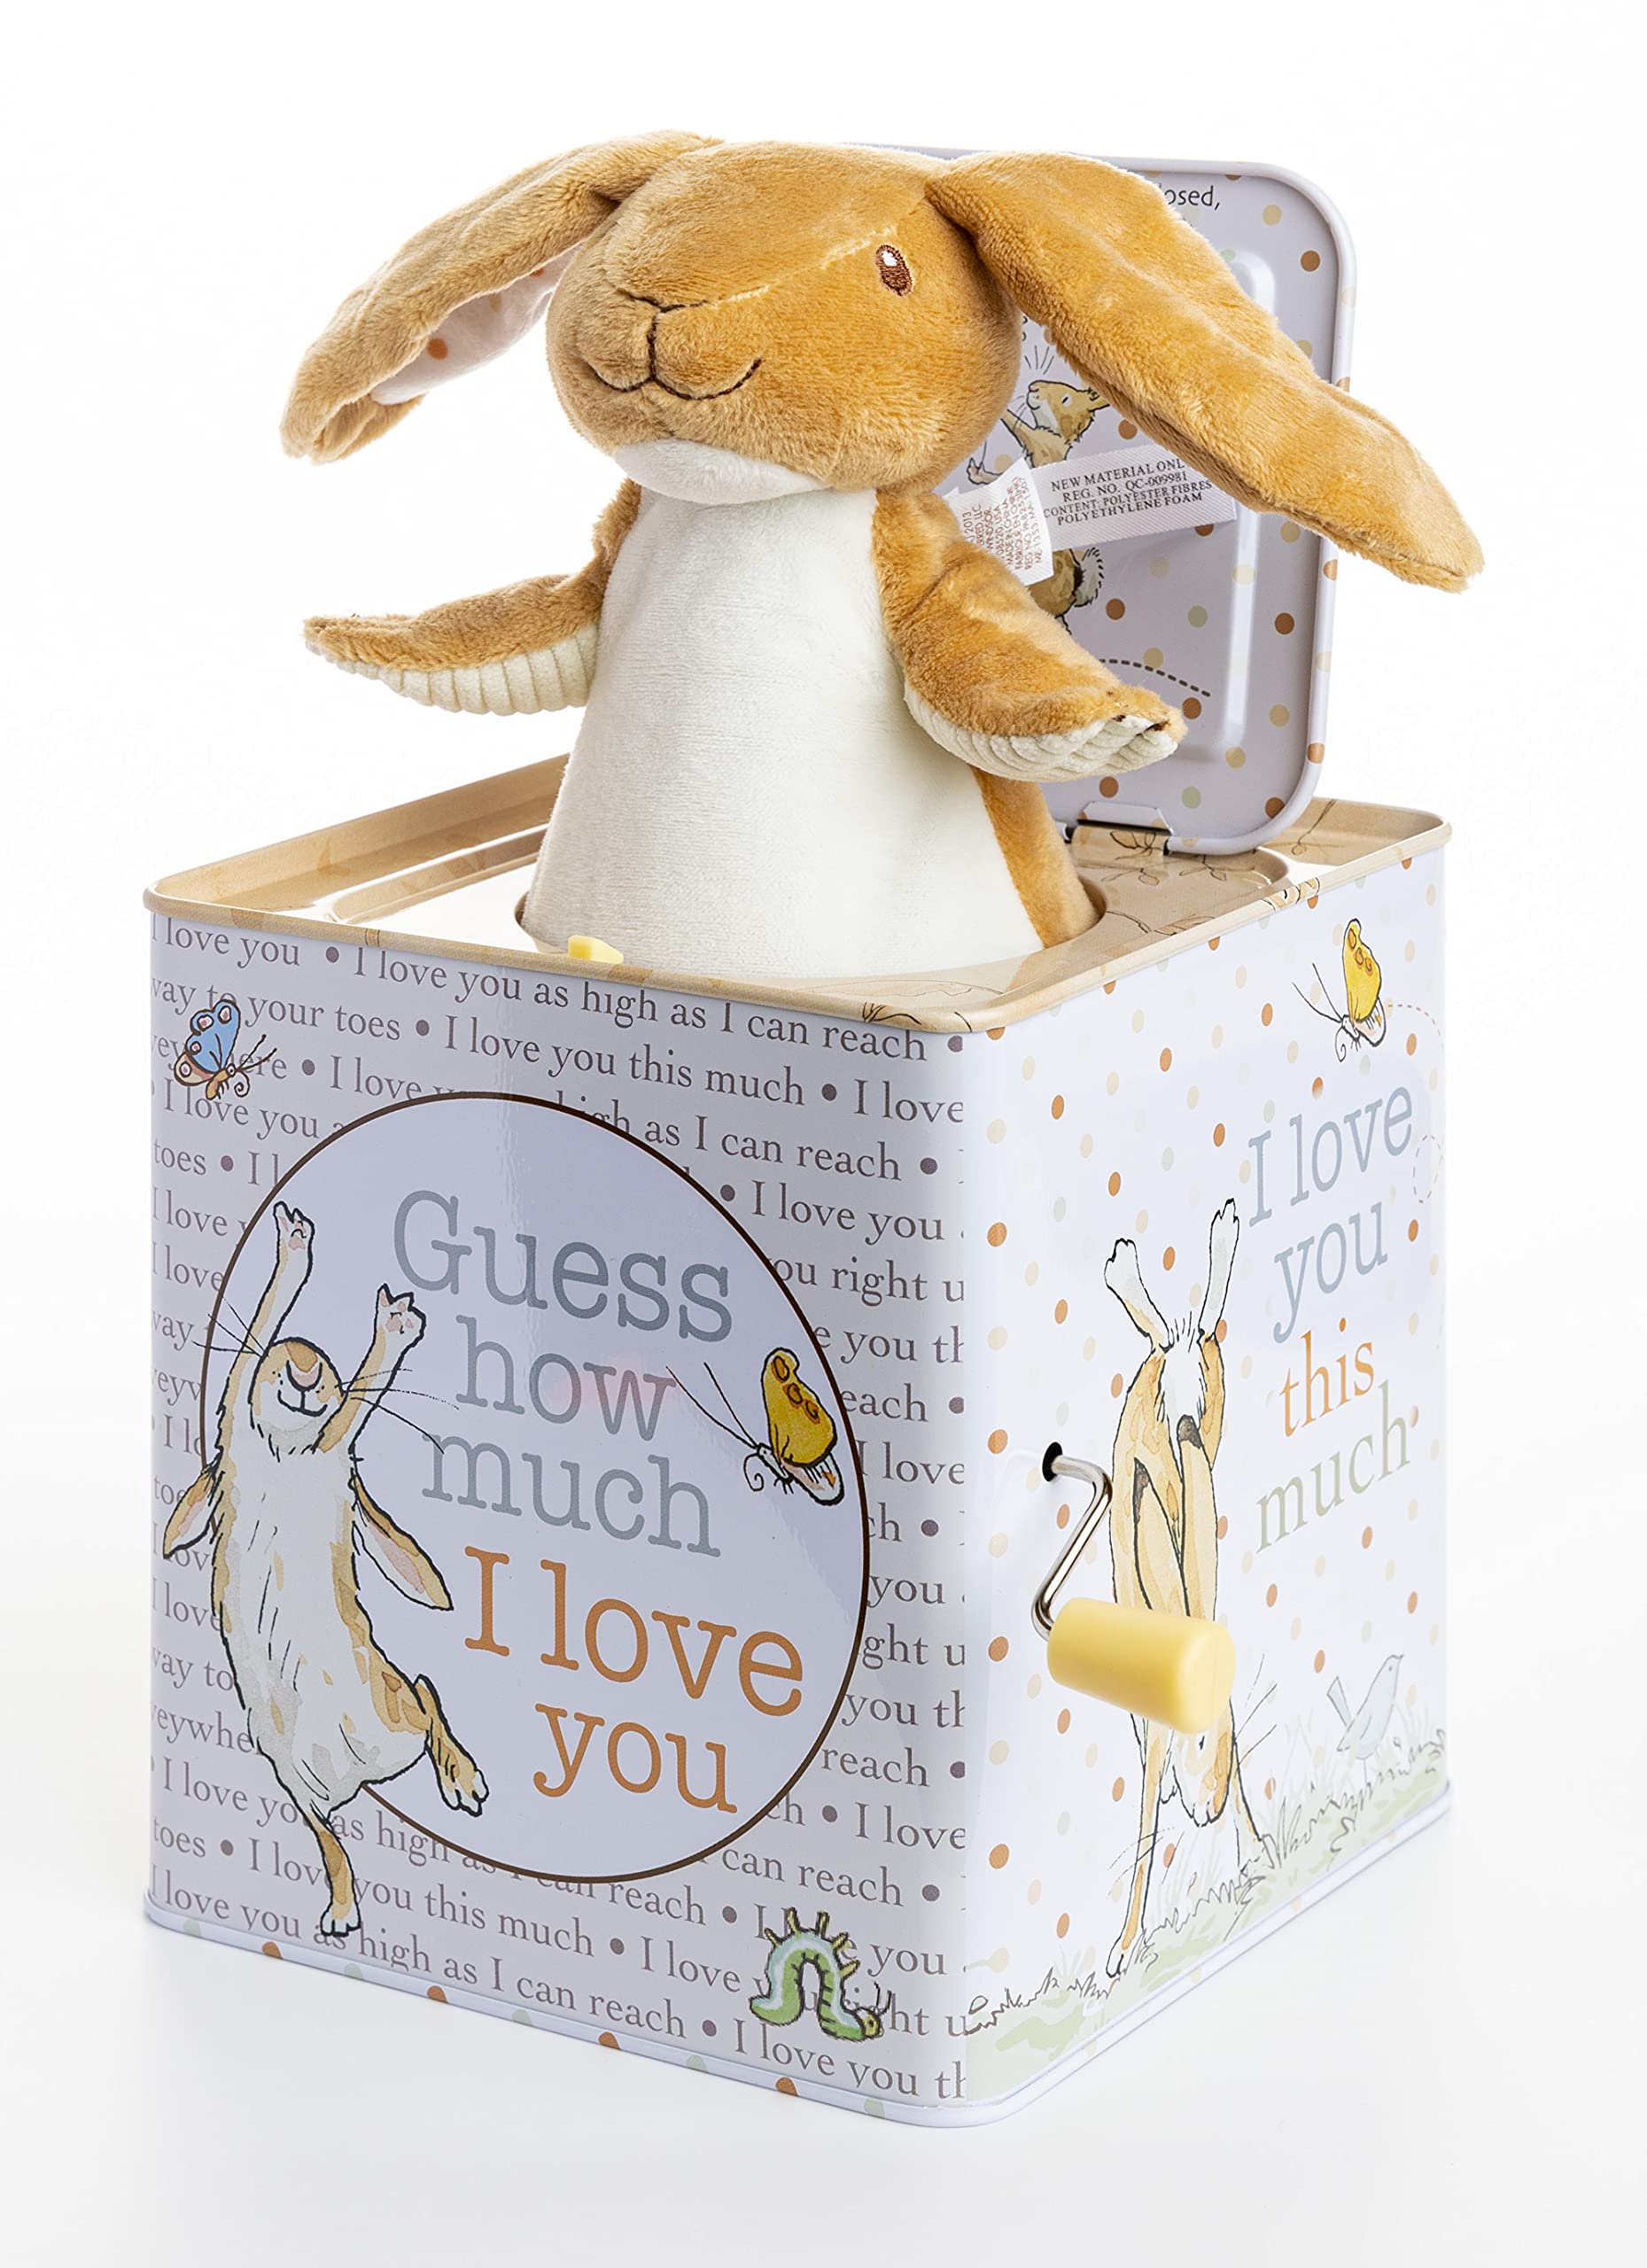 Book Cover KIDS PREFERRED Guess How Much I Love You - Nutbrown Hare Jack-in-The-Box - Musical Toy for Babies